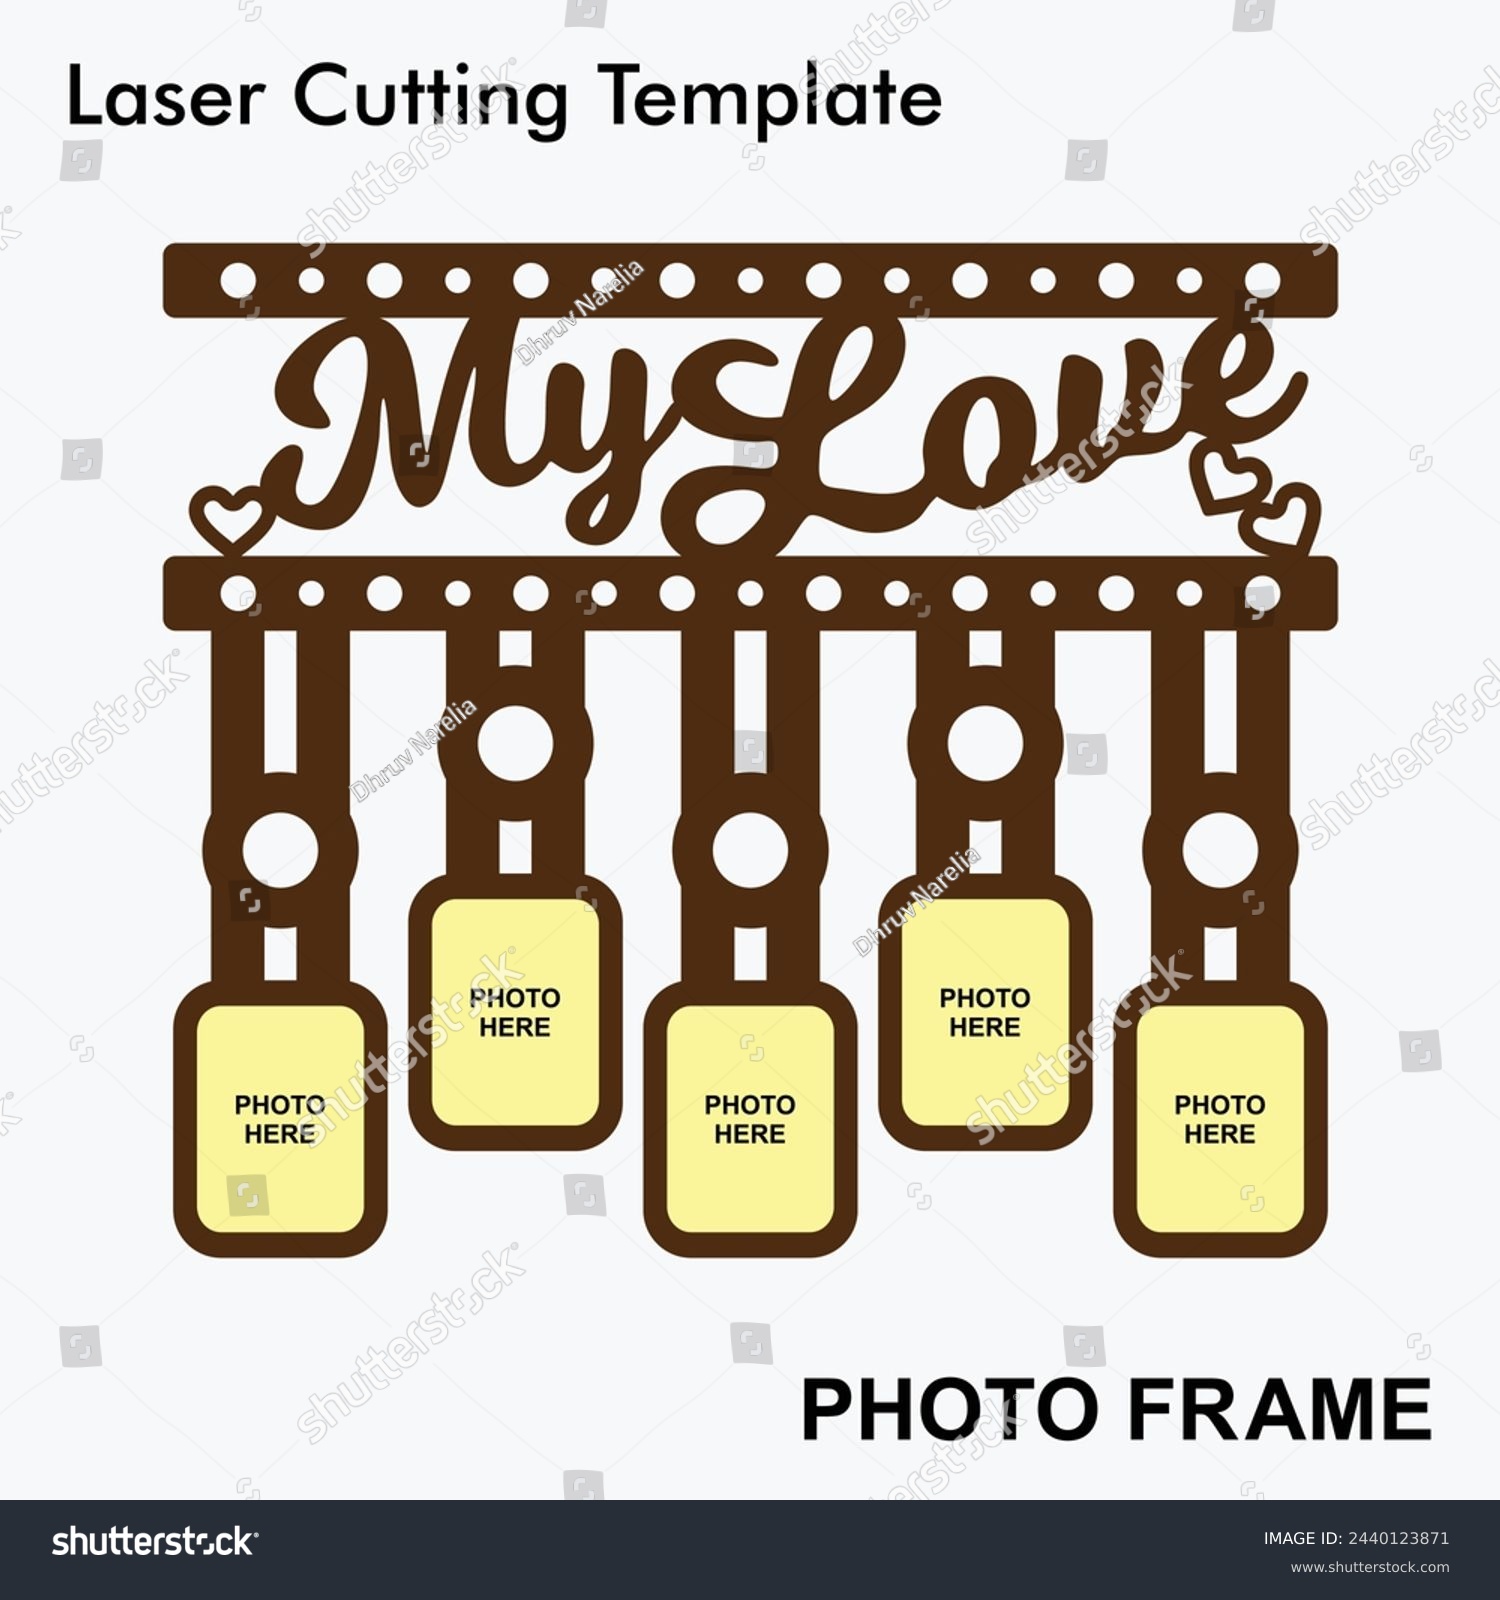 SVG of My Love laser cut photo frame with 5 photo. Home decor wooden sublimation frame template. Suitable for wedding and anniversary gifts. Laser cut photo frame template design for mdf and acrylic cutting. svg